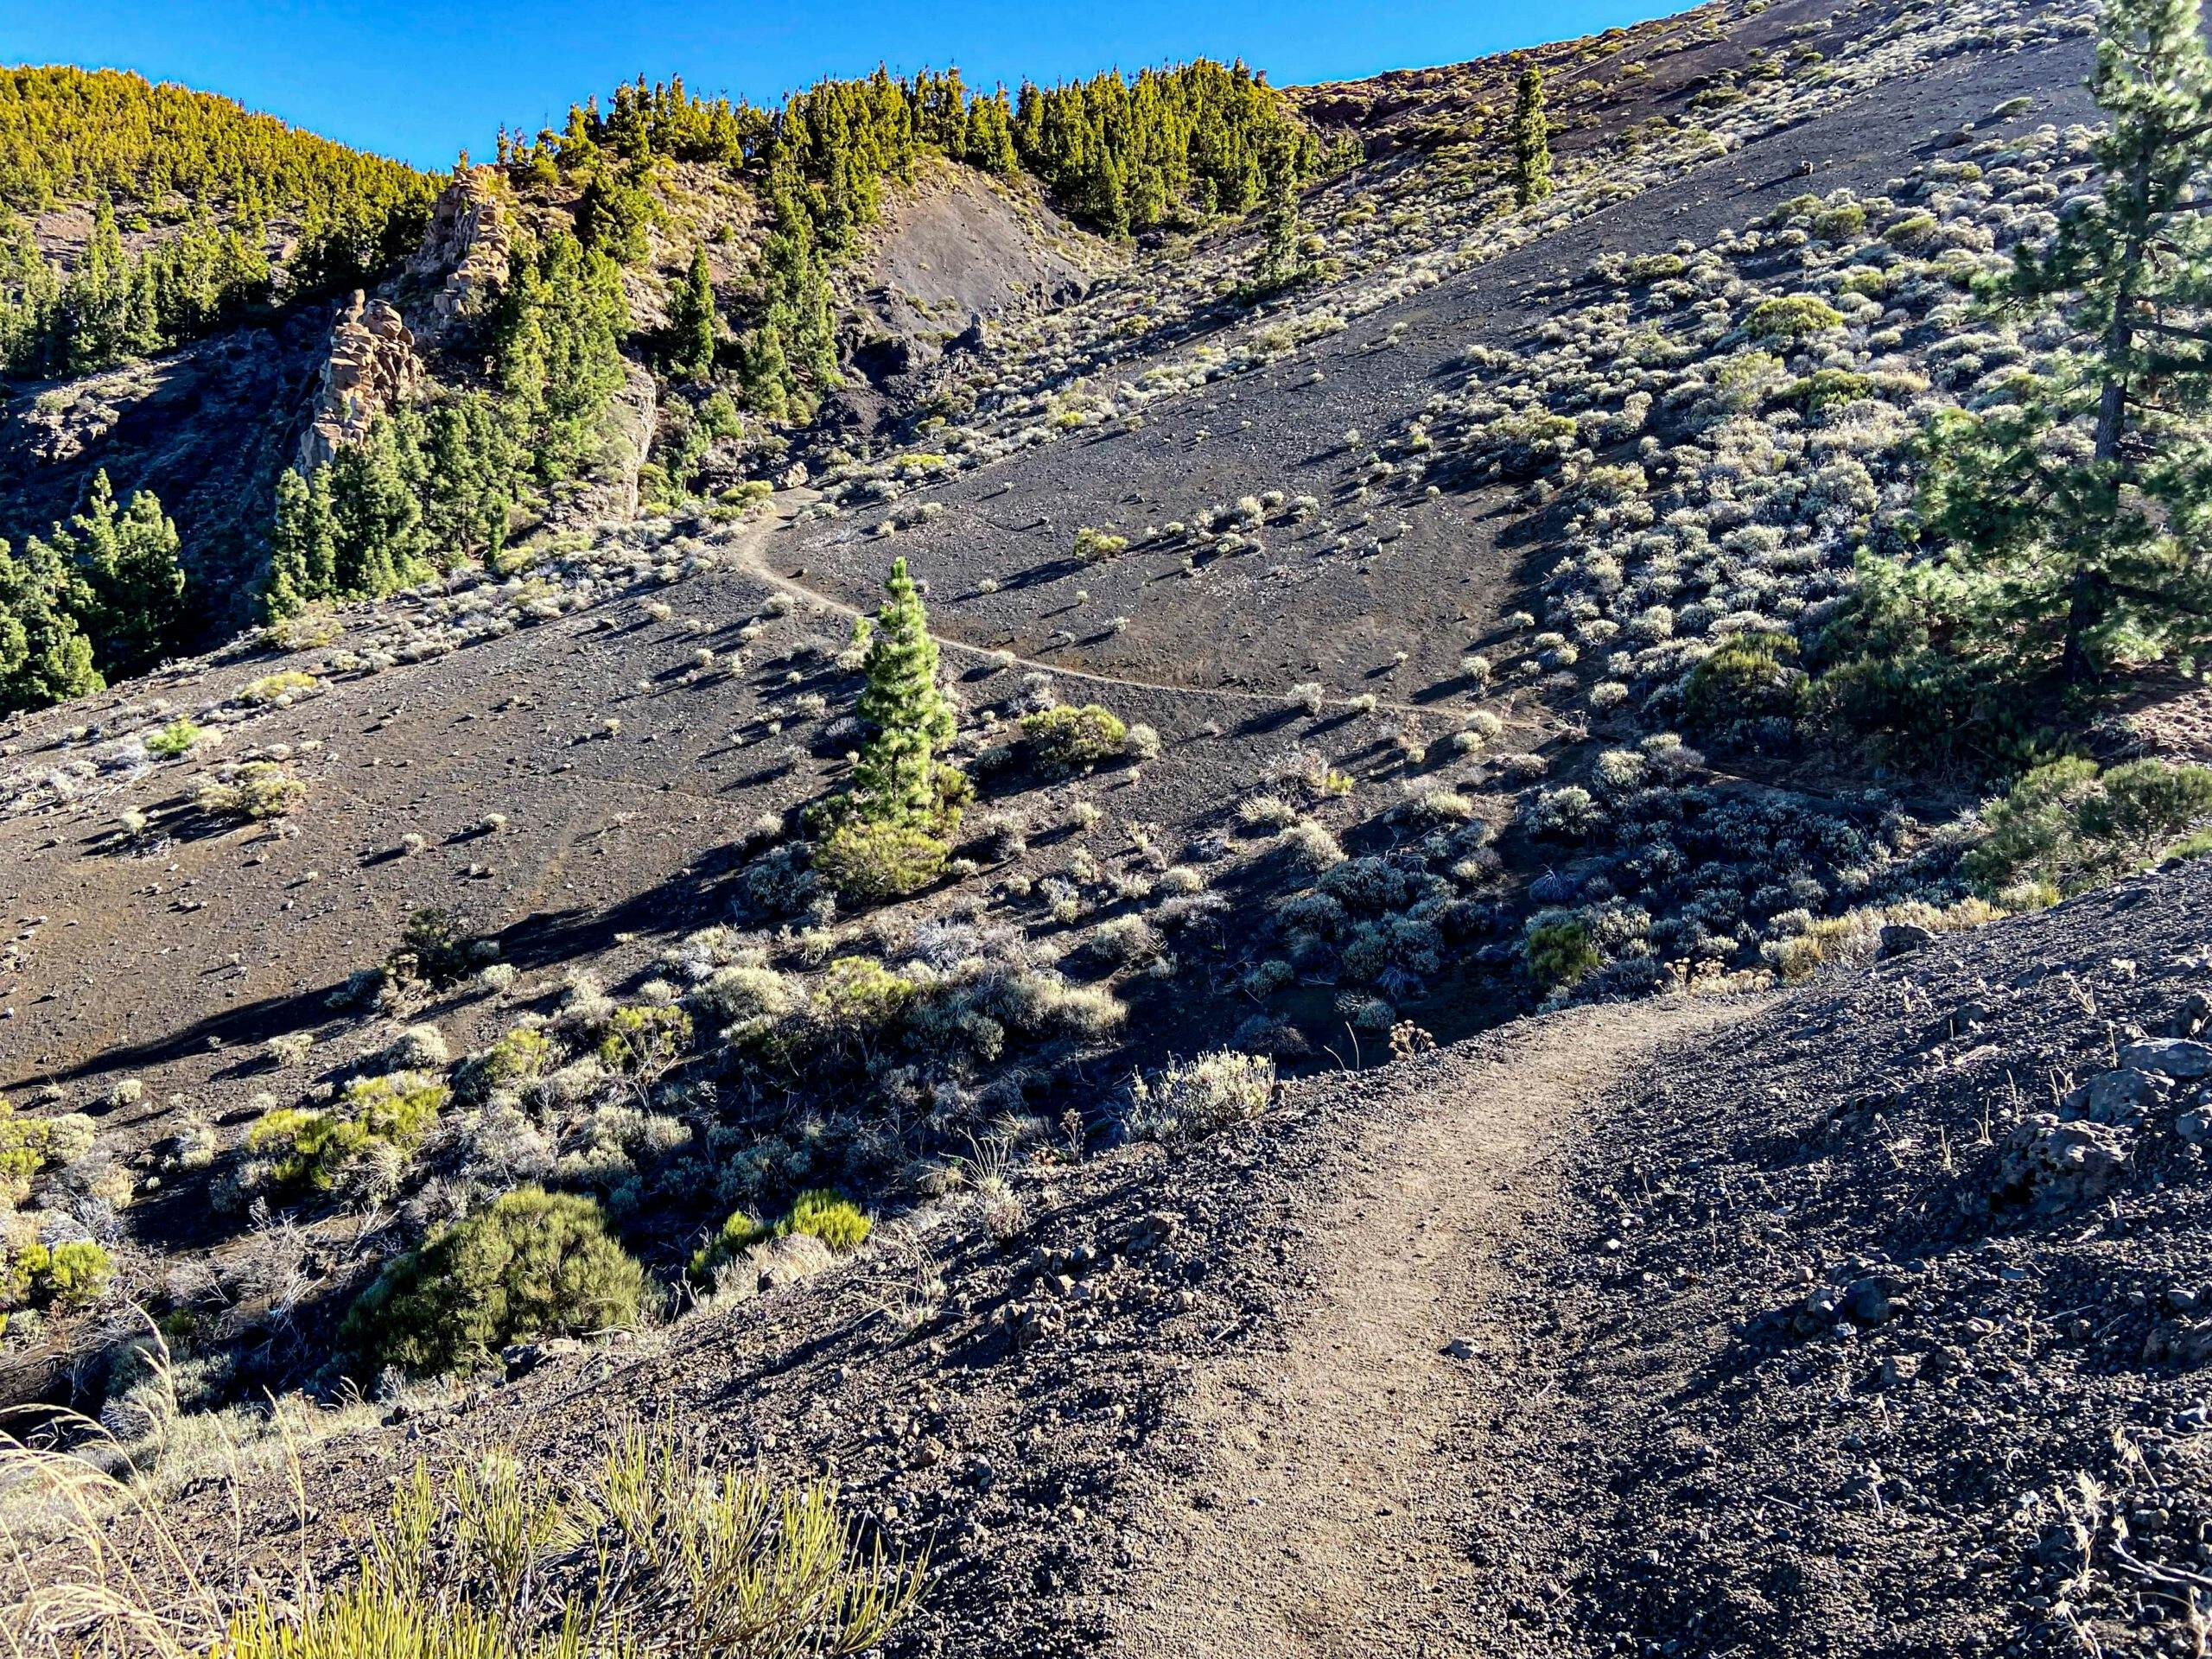 Hiking trail along the slope over sand and volcanic stone